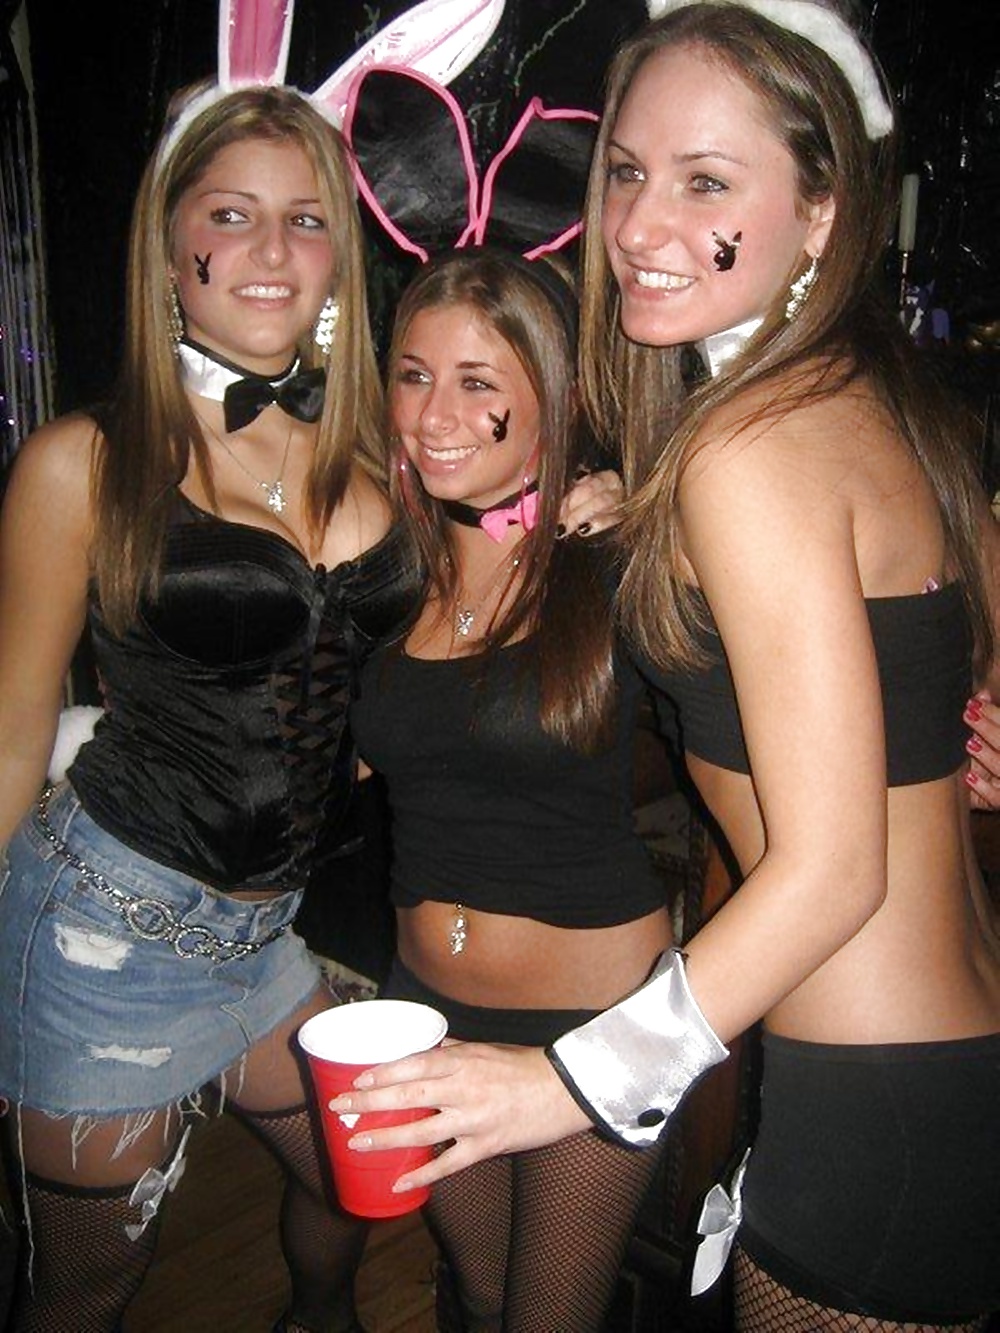 Party Girls Erotica By 7 twistedworlds #14554709